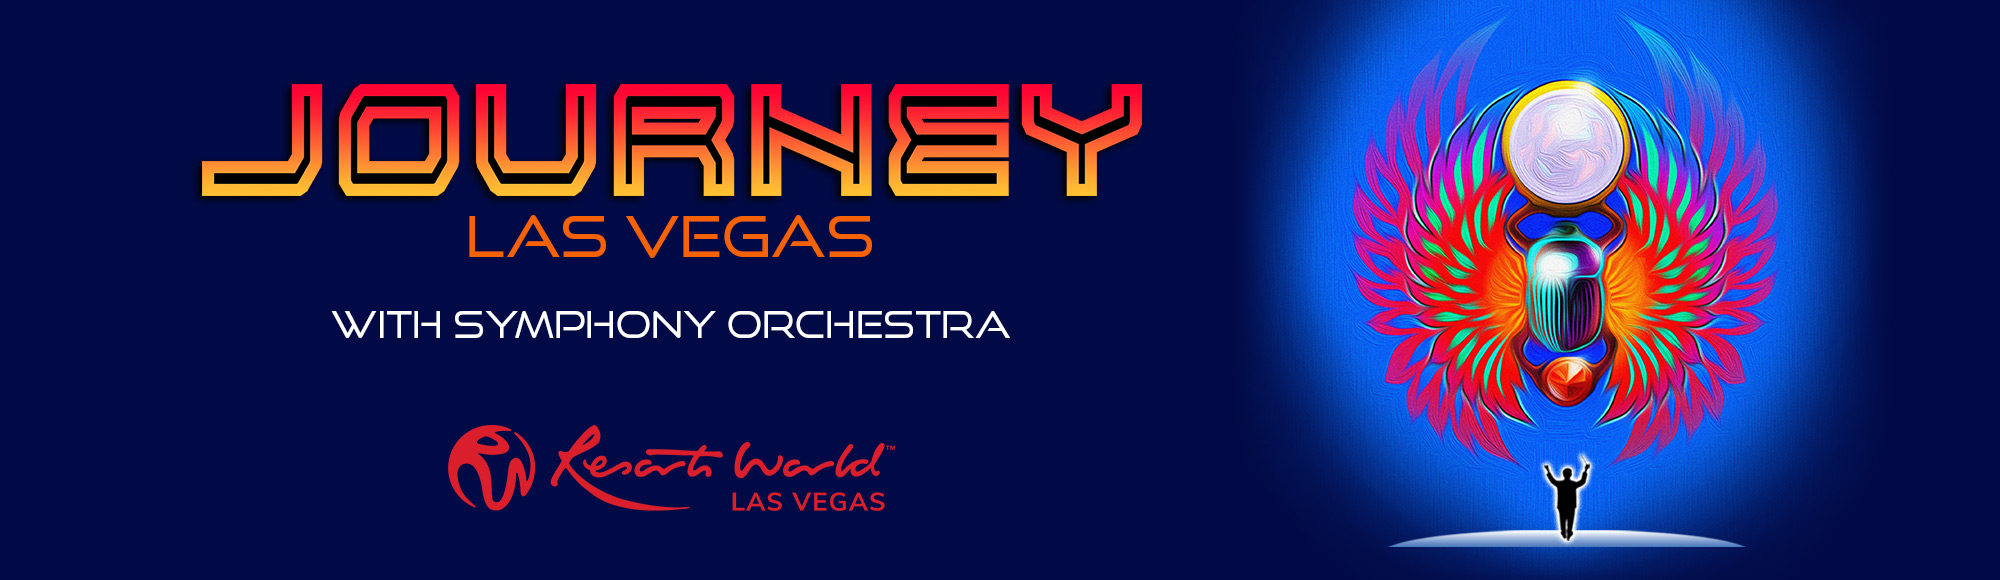 Journey Las Vegas with Symphony Orchestra show